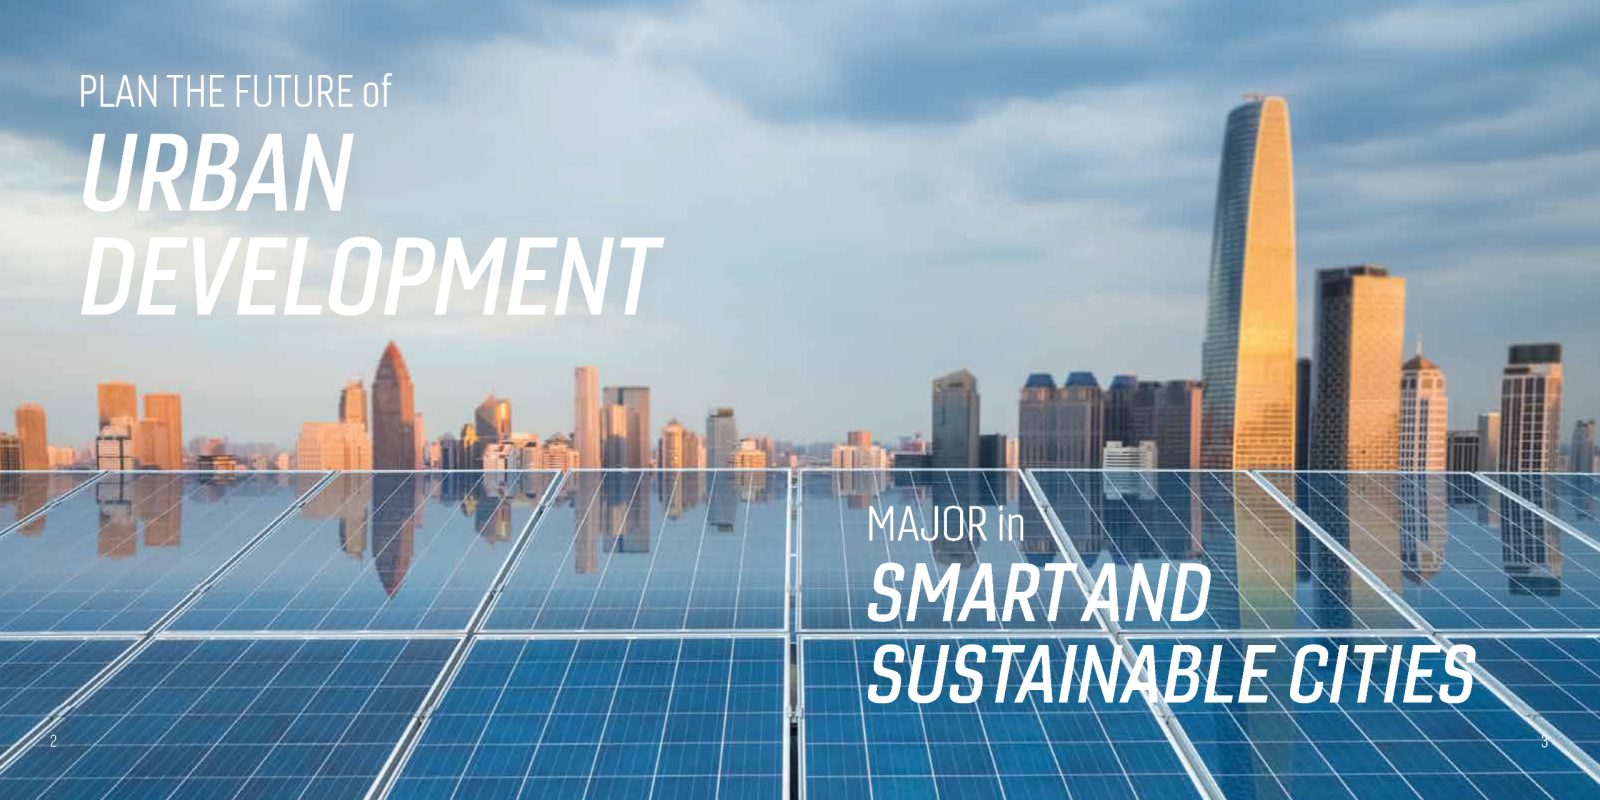 Major in Smart and Sustainable Cities